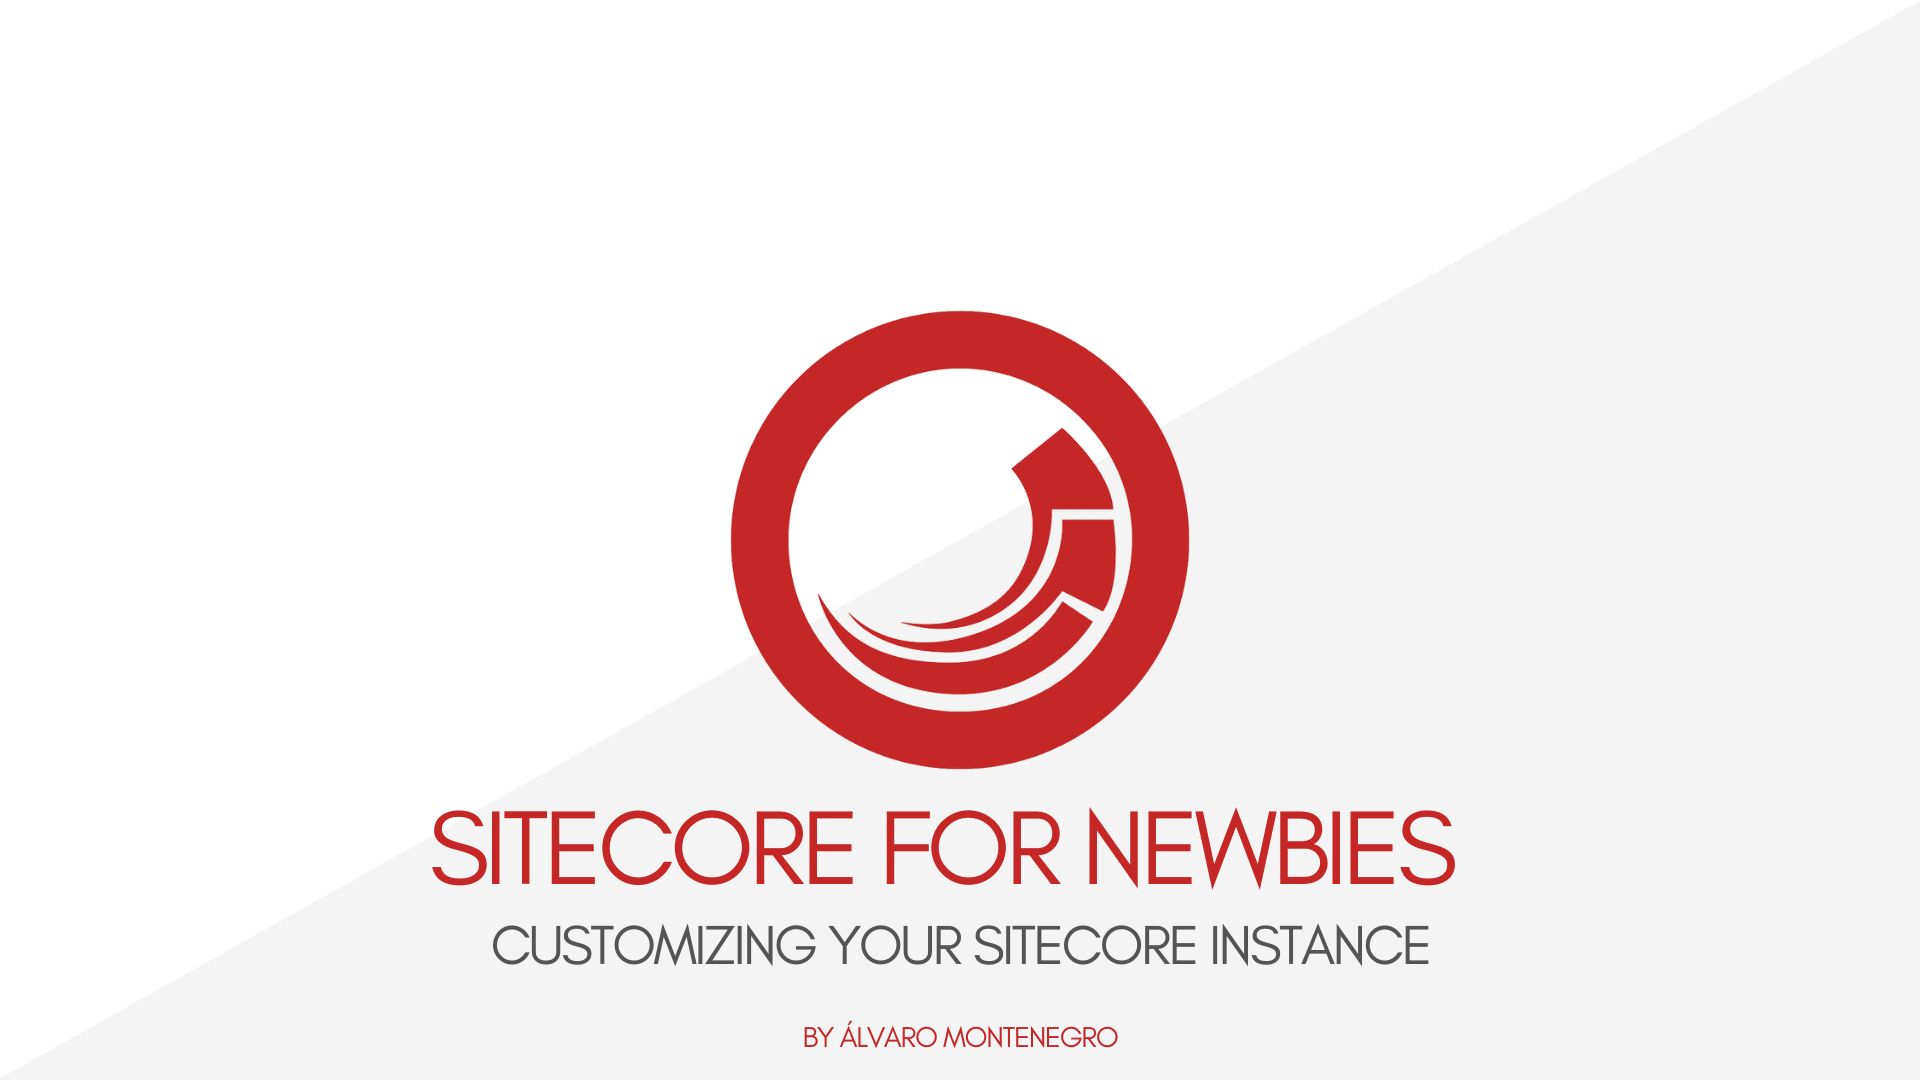 [Sitecore For Newbies] Customizing Your Sitecore Instance